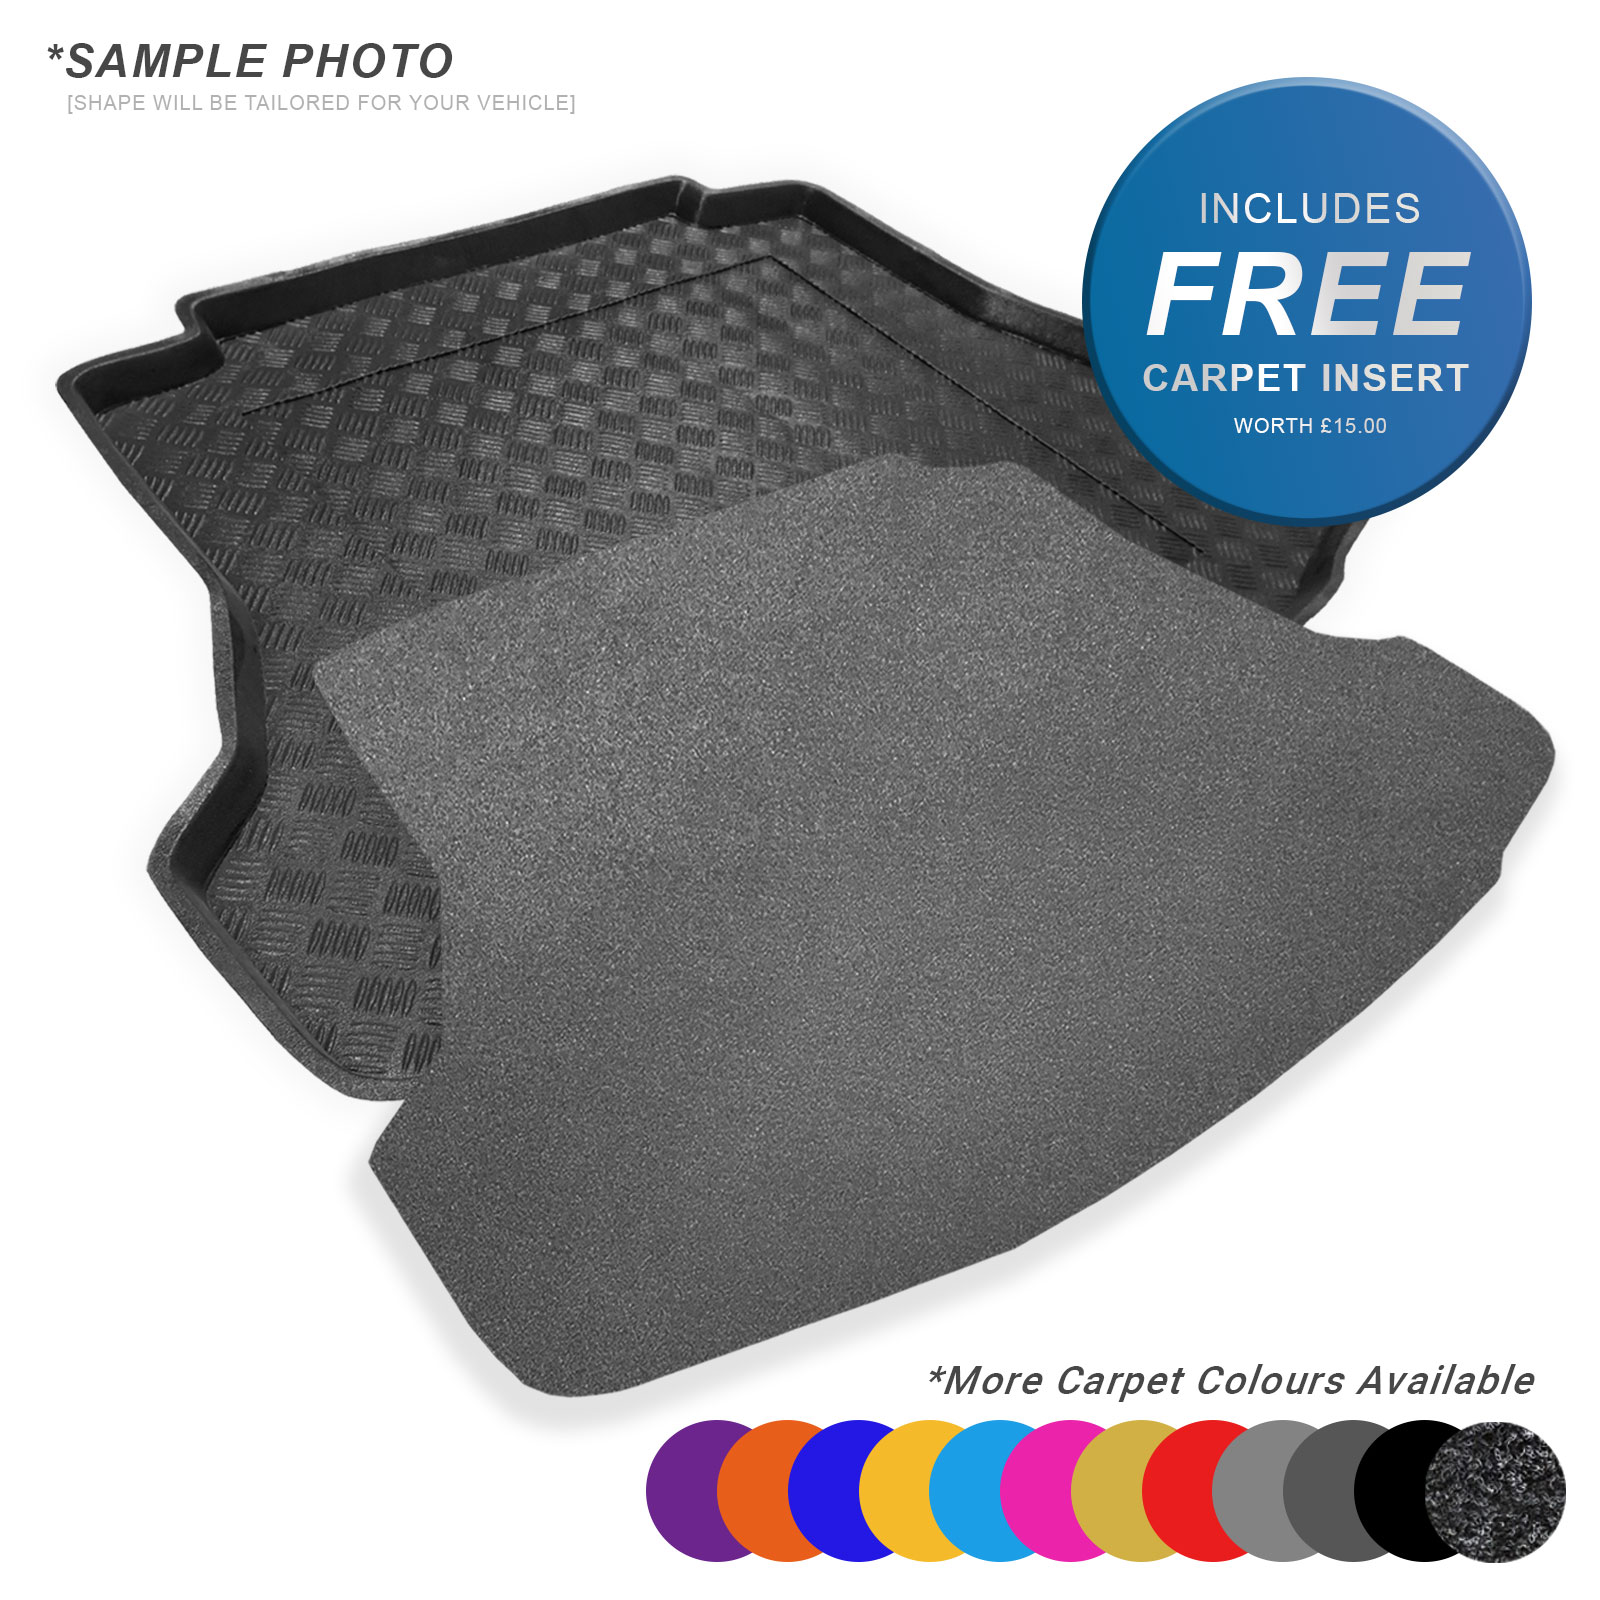 CARMATS4U.COM i30 Fastback 2019 FREE Anthracite Carpet Insert Fully Tailored PVC Boot Liner/Tray